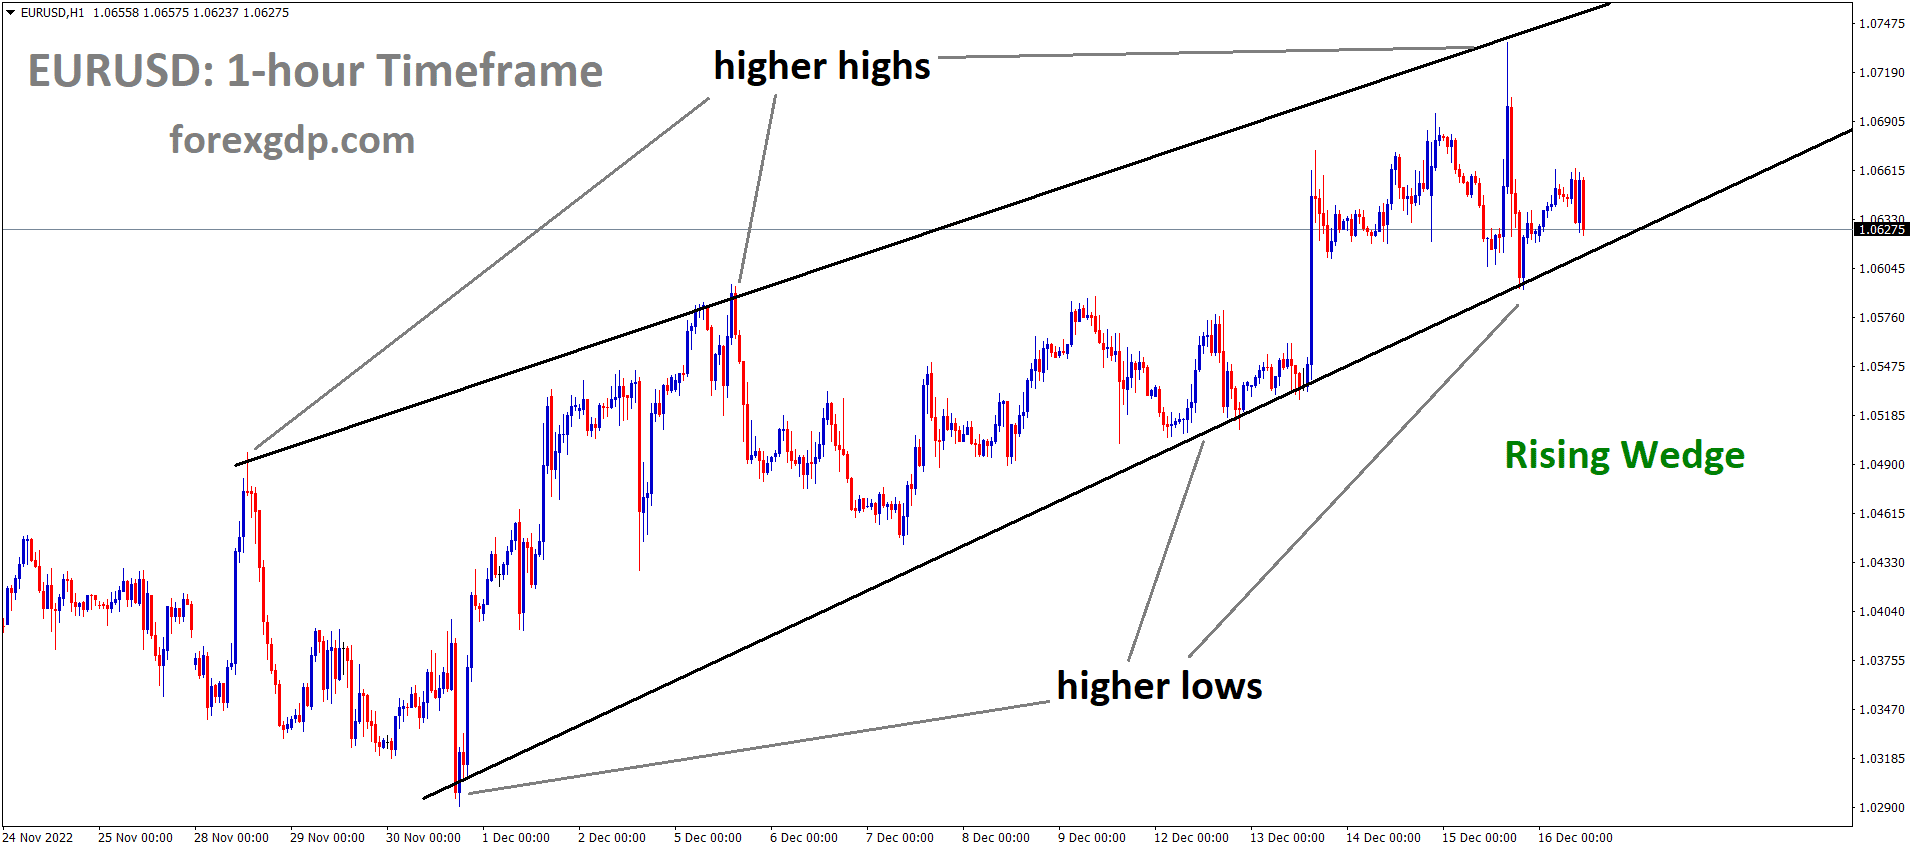 EURUSD is moving in the rising wedge pattern and the market has reached the higher low area of the pattern